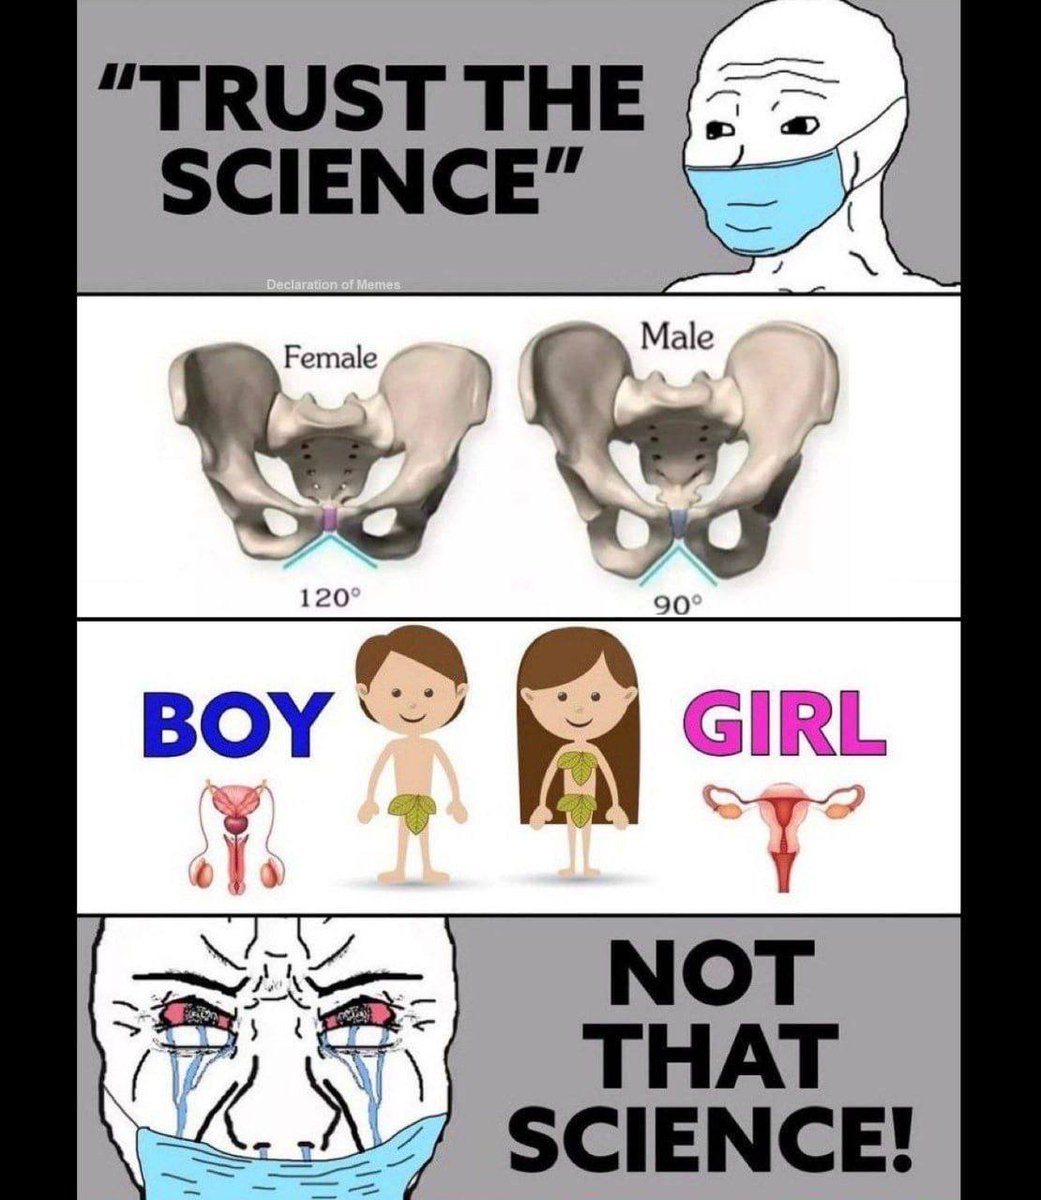 ScIeNcE!